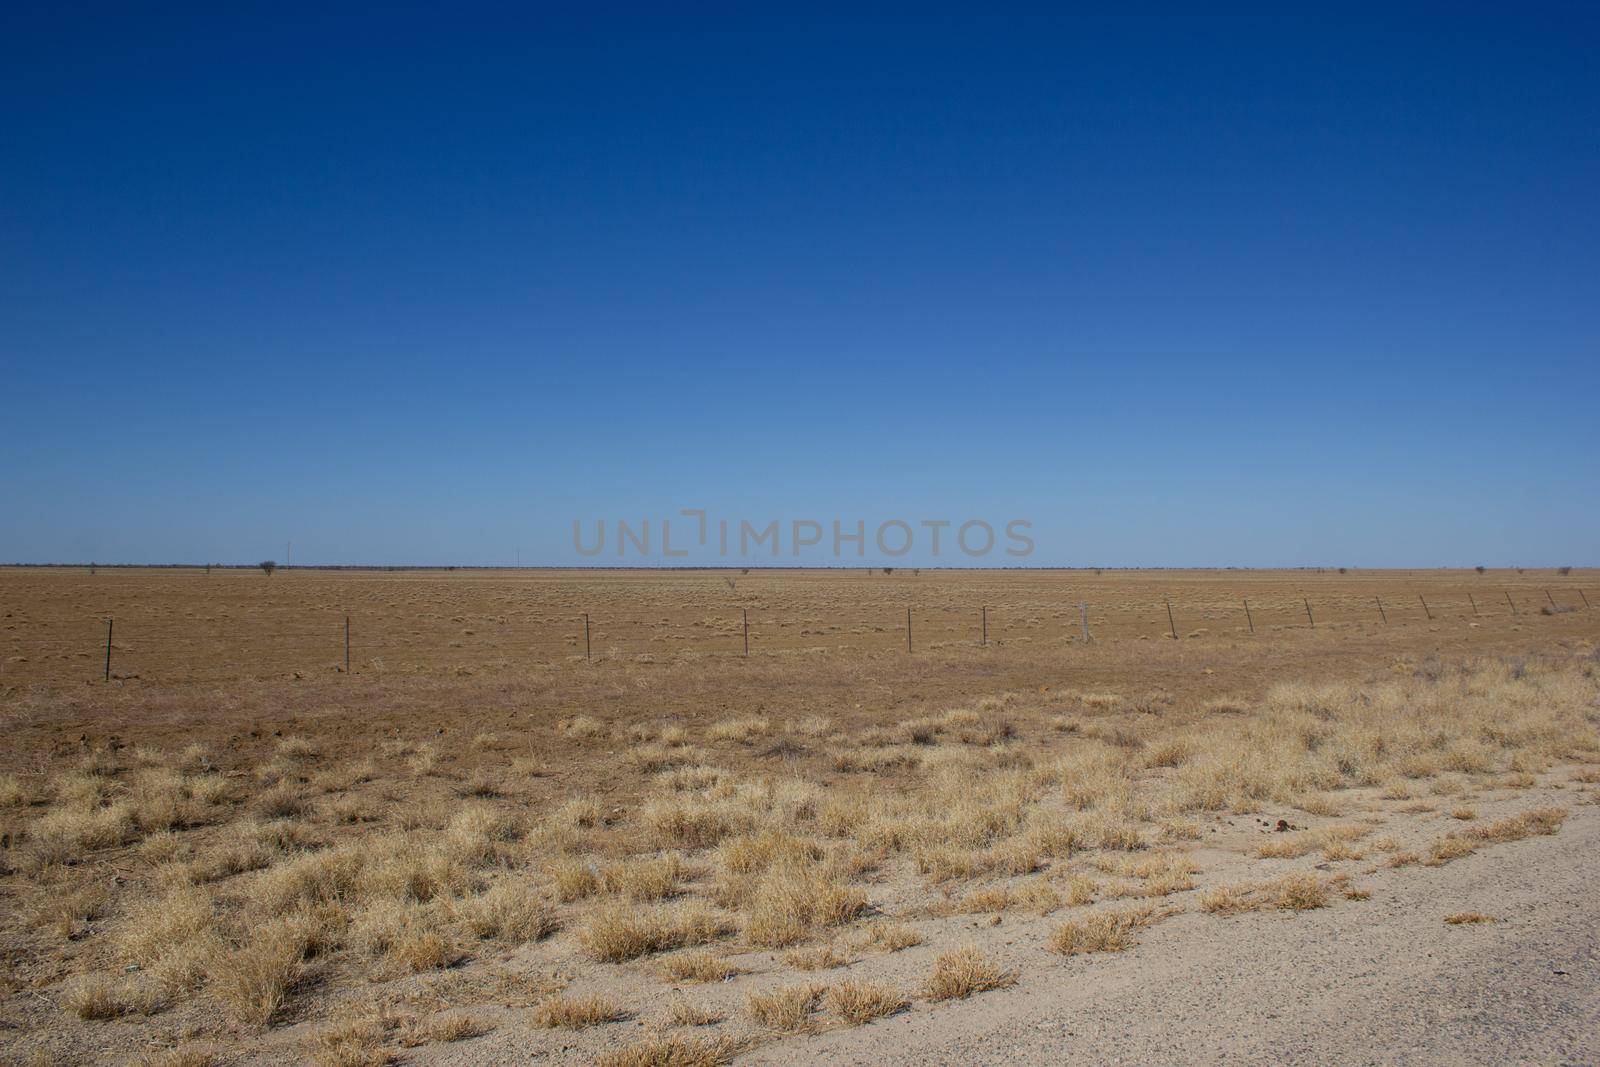 Outback scenery with beautiful blue sky in the Northern Territory of Australia by bettercallcurry